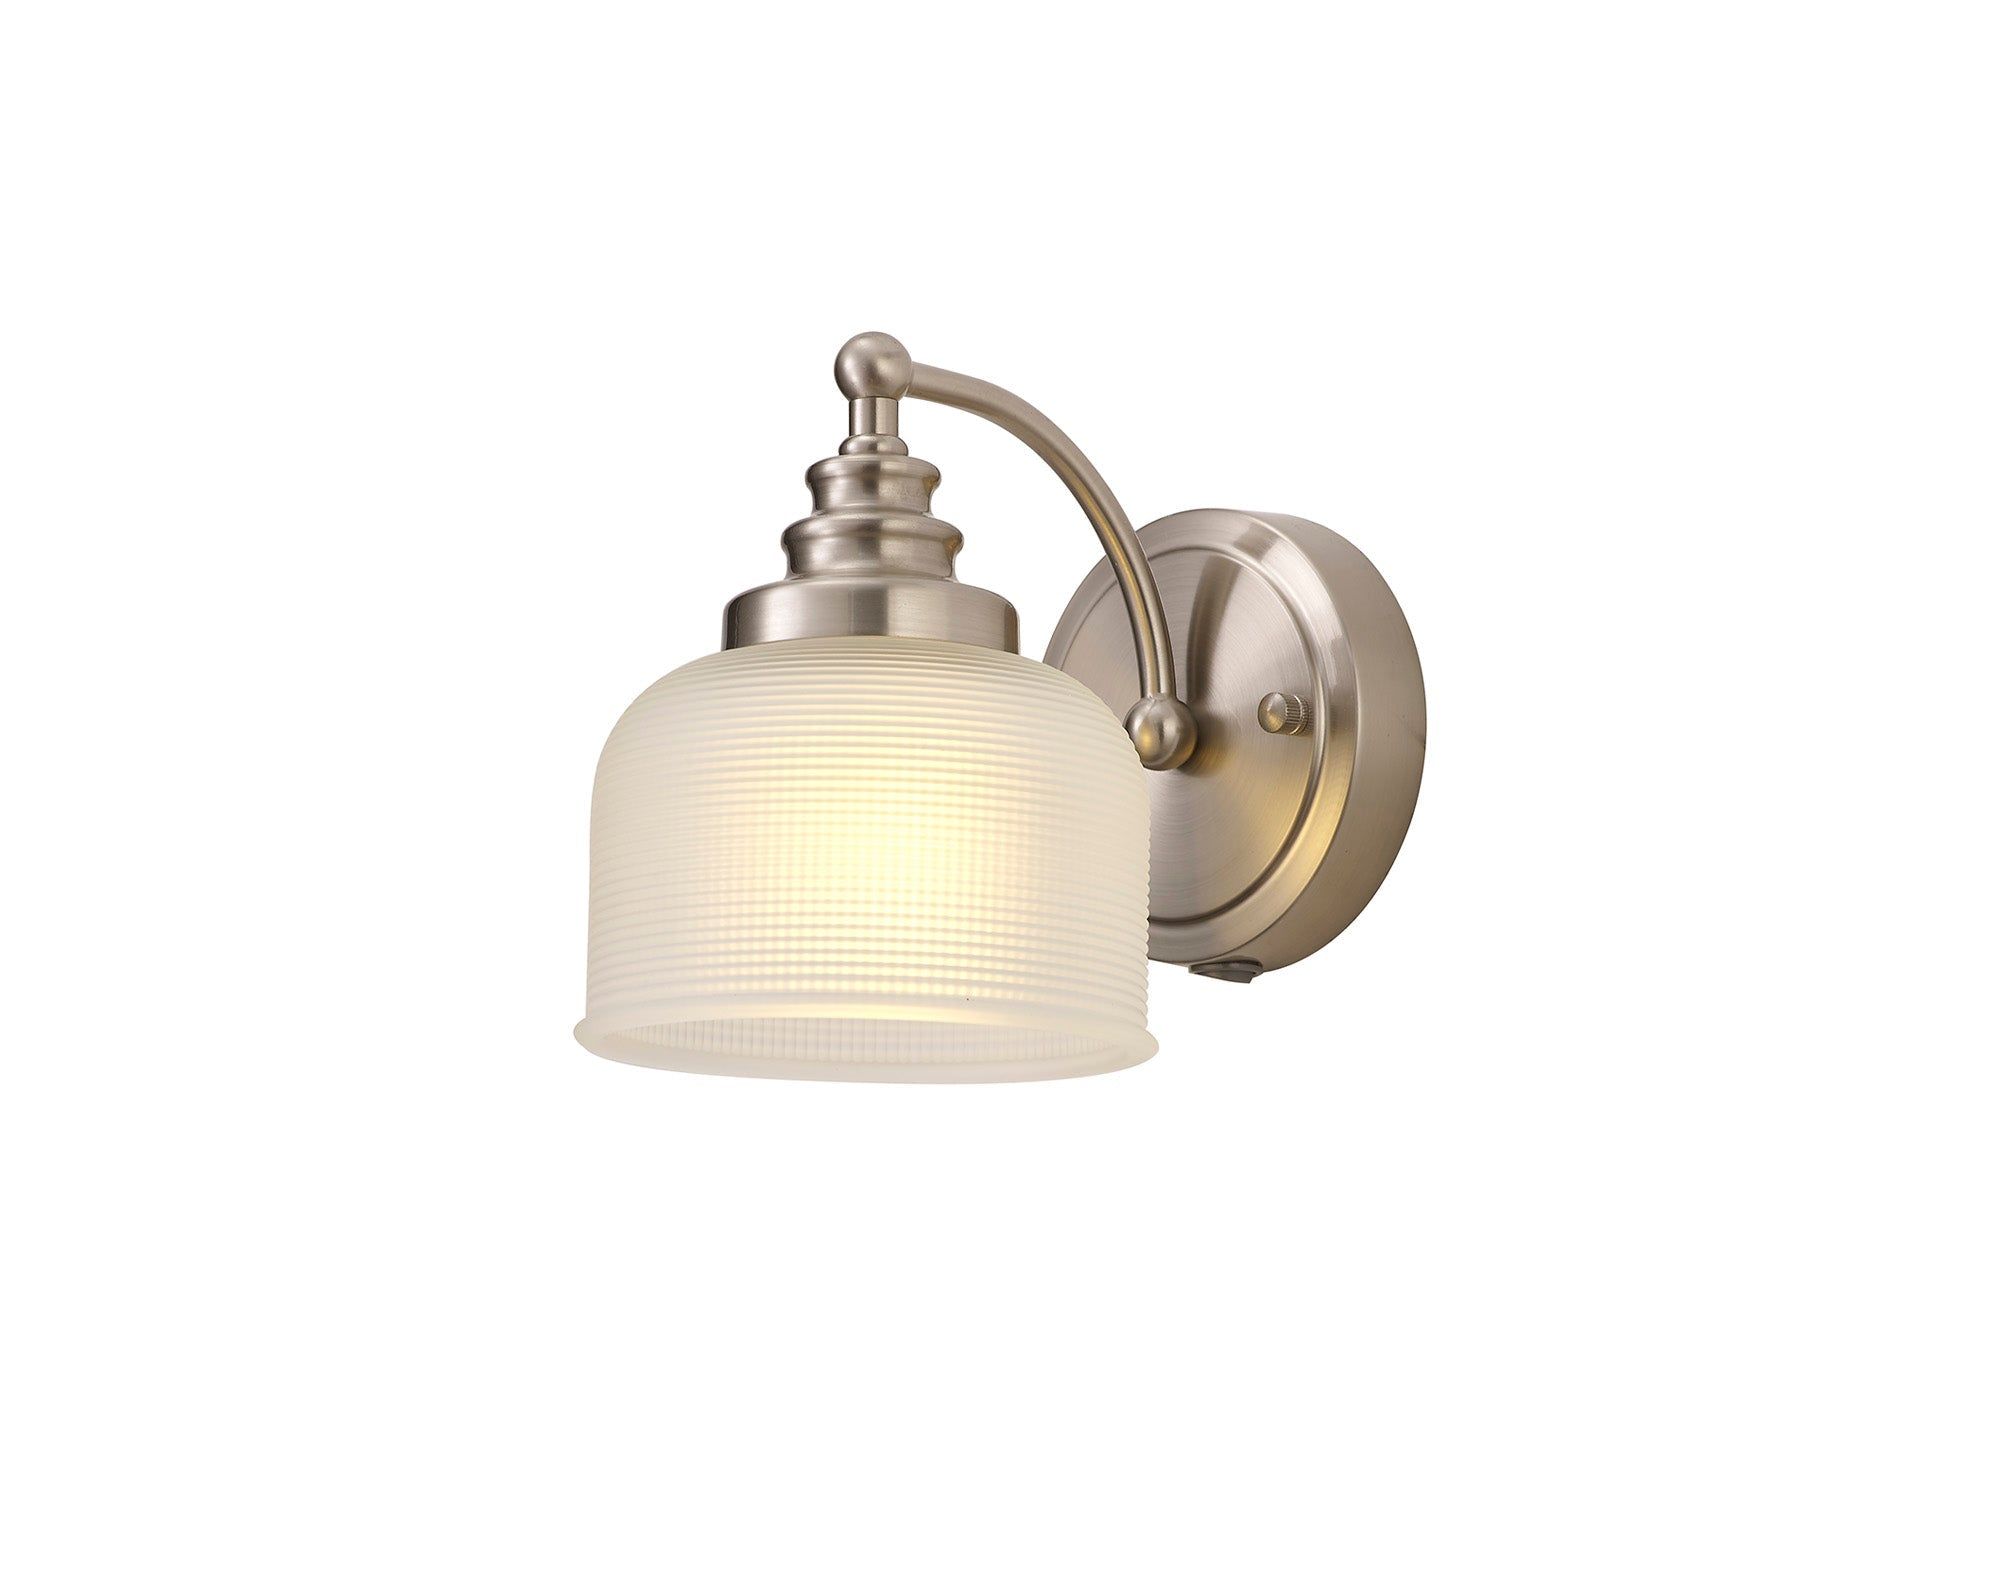 Isola Switched Wall Lamp 1 Light E27 Satin Nickel Prismatic Glass